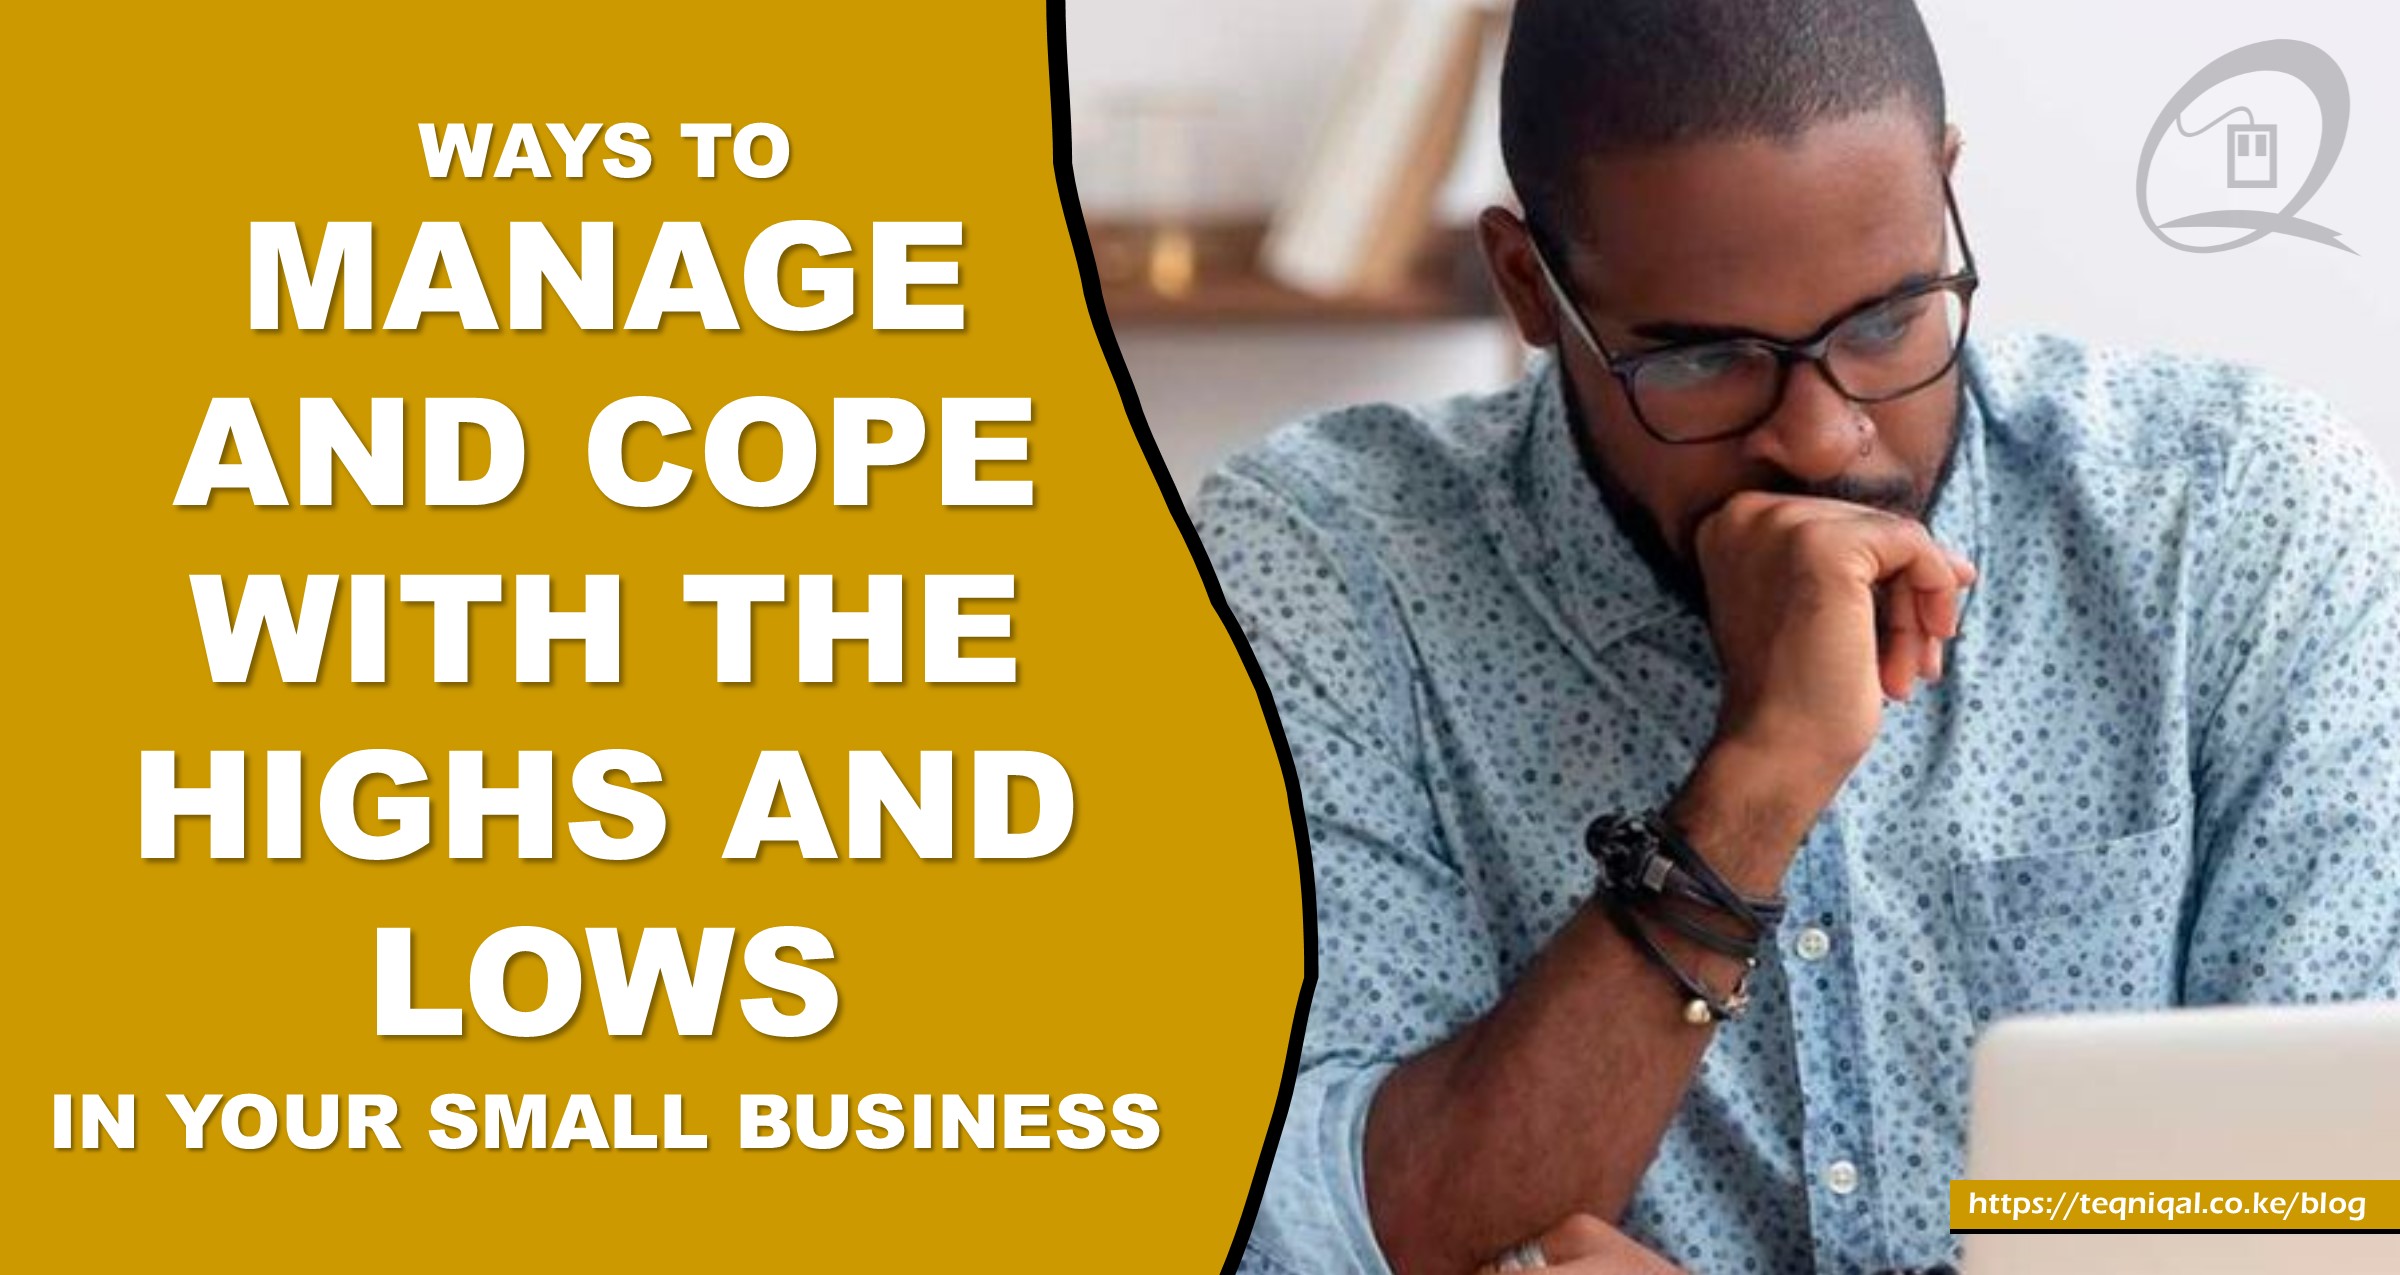 Ways To Manage And Cope With The Highs And Lows In Your Small Business